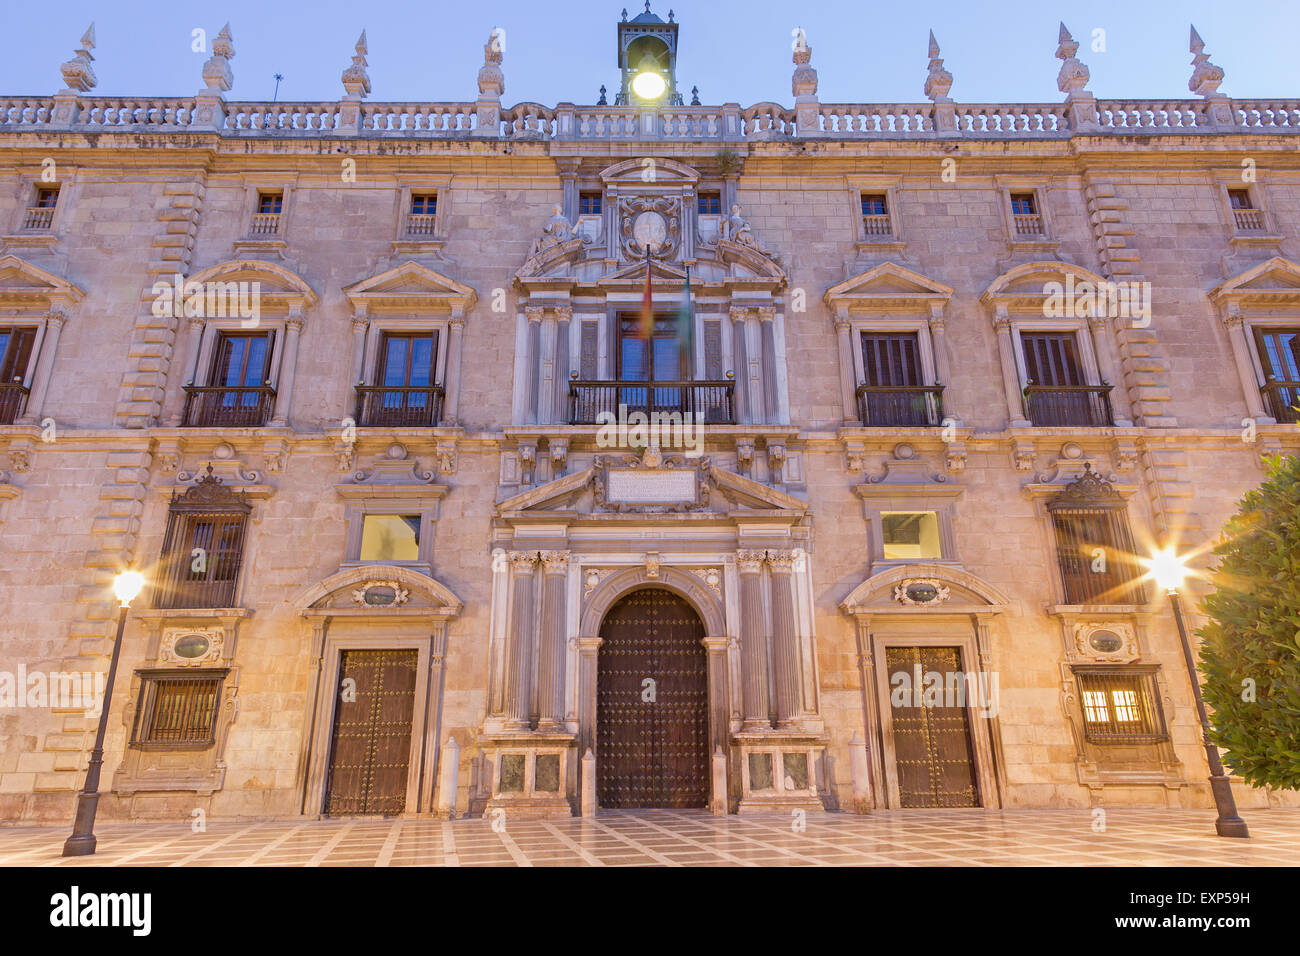 GRANADA, SPAIN - MAY 29, 2015: The facade of palace Real Chancilleria de Granada on the St. Ann square at dusk. Stock Photo